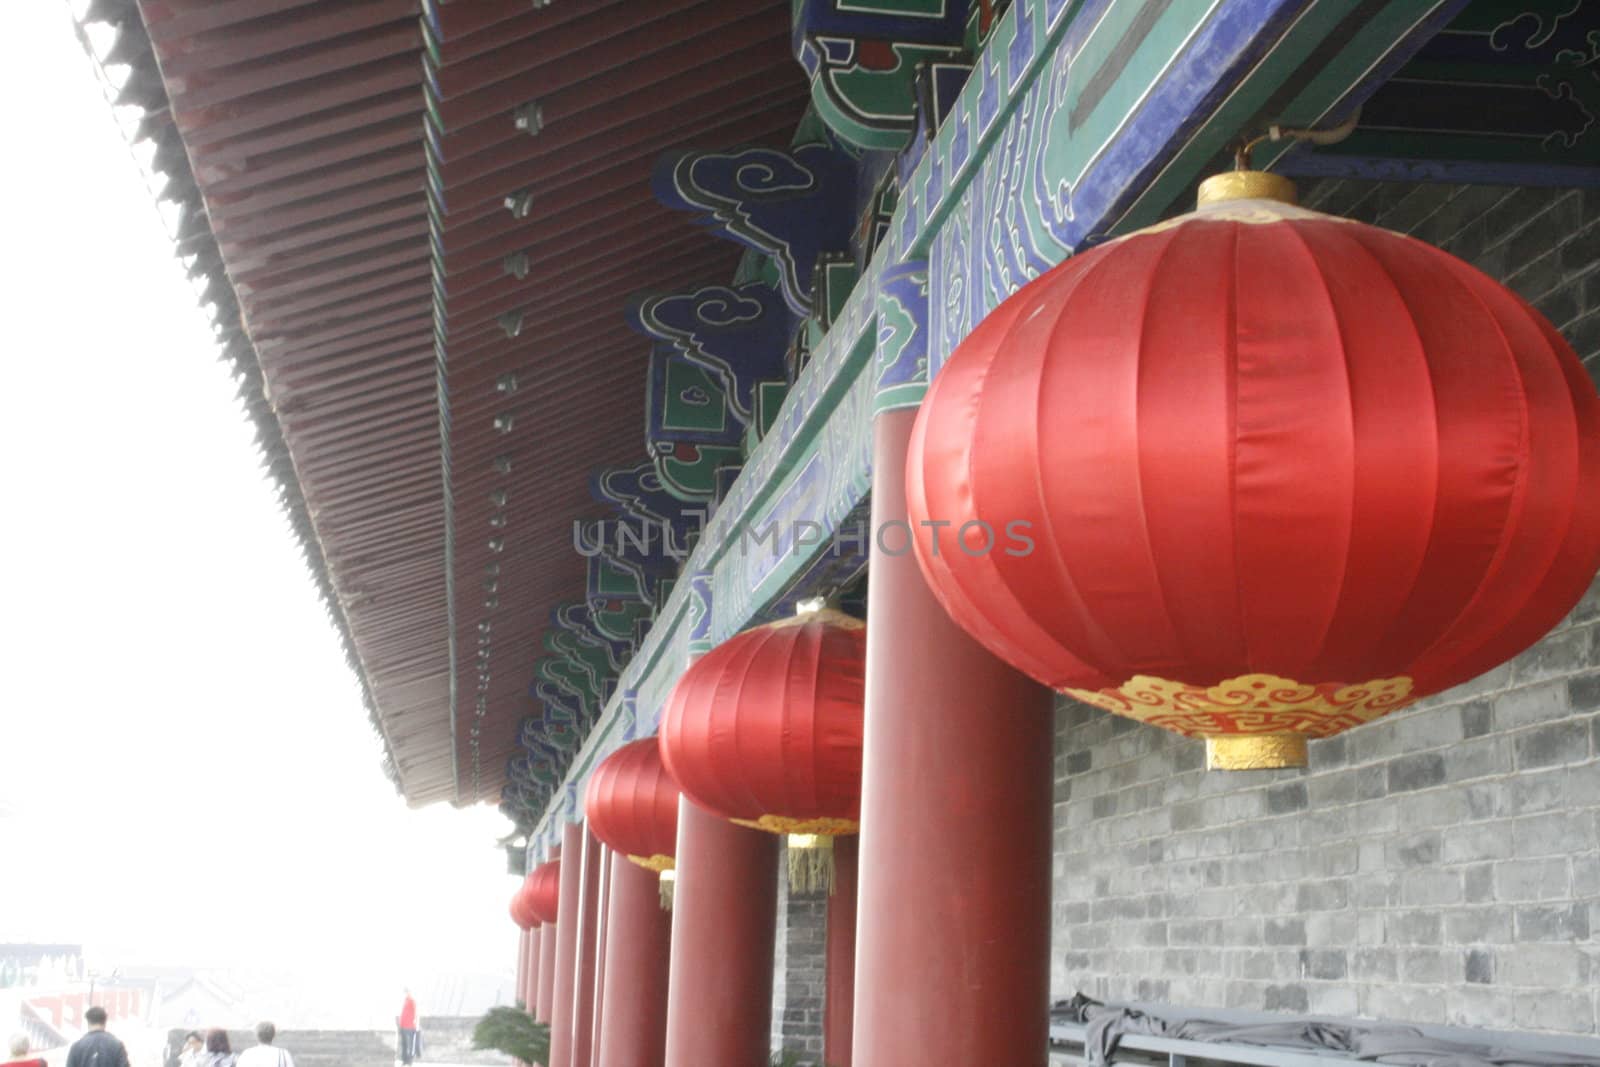 downtown of Xian, Lanterns at the southern gate building